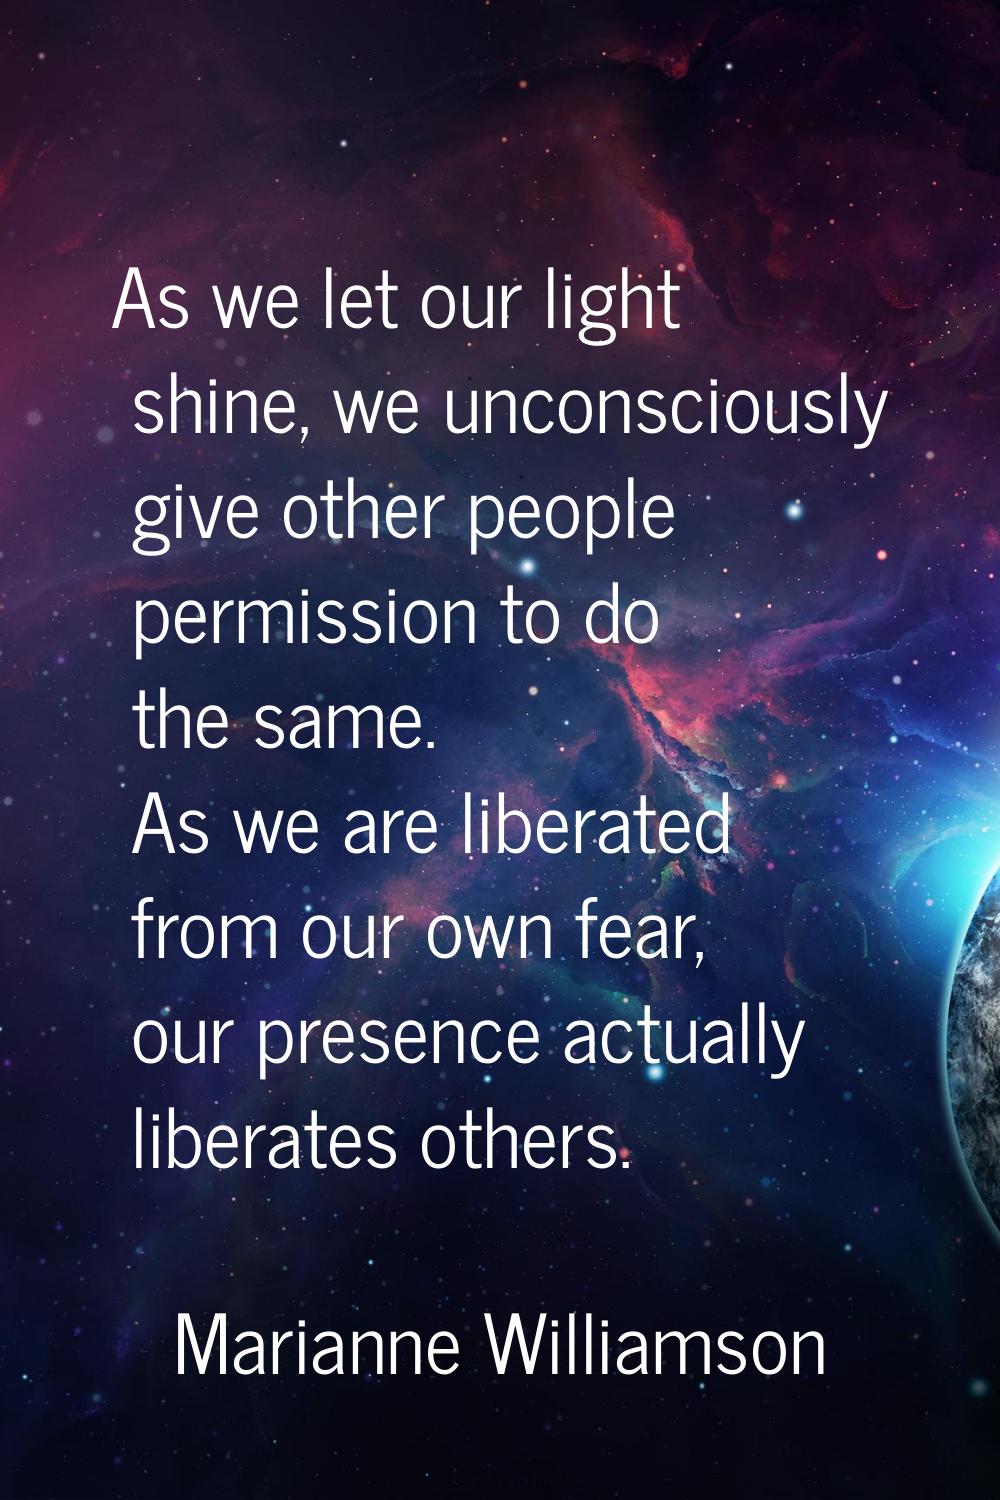 As we let our light shine, we unconsciously give other people permission to do the same. As we are 